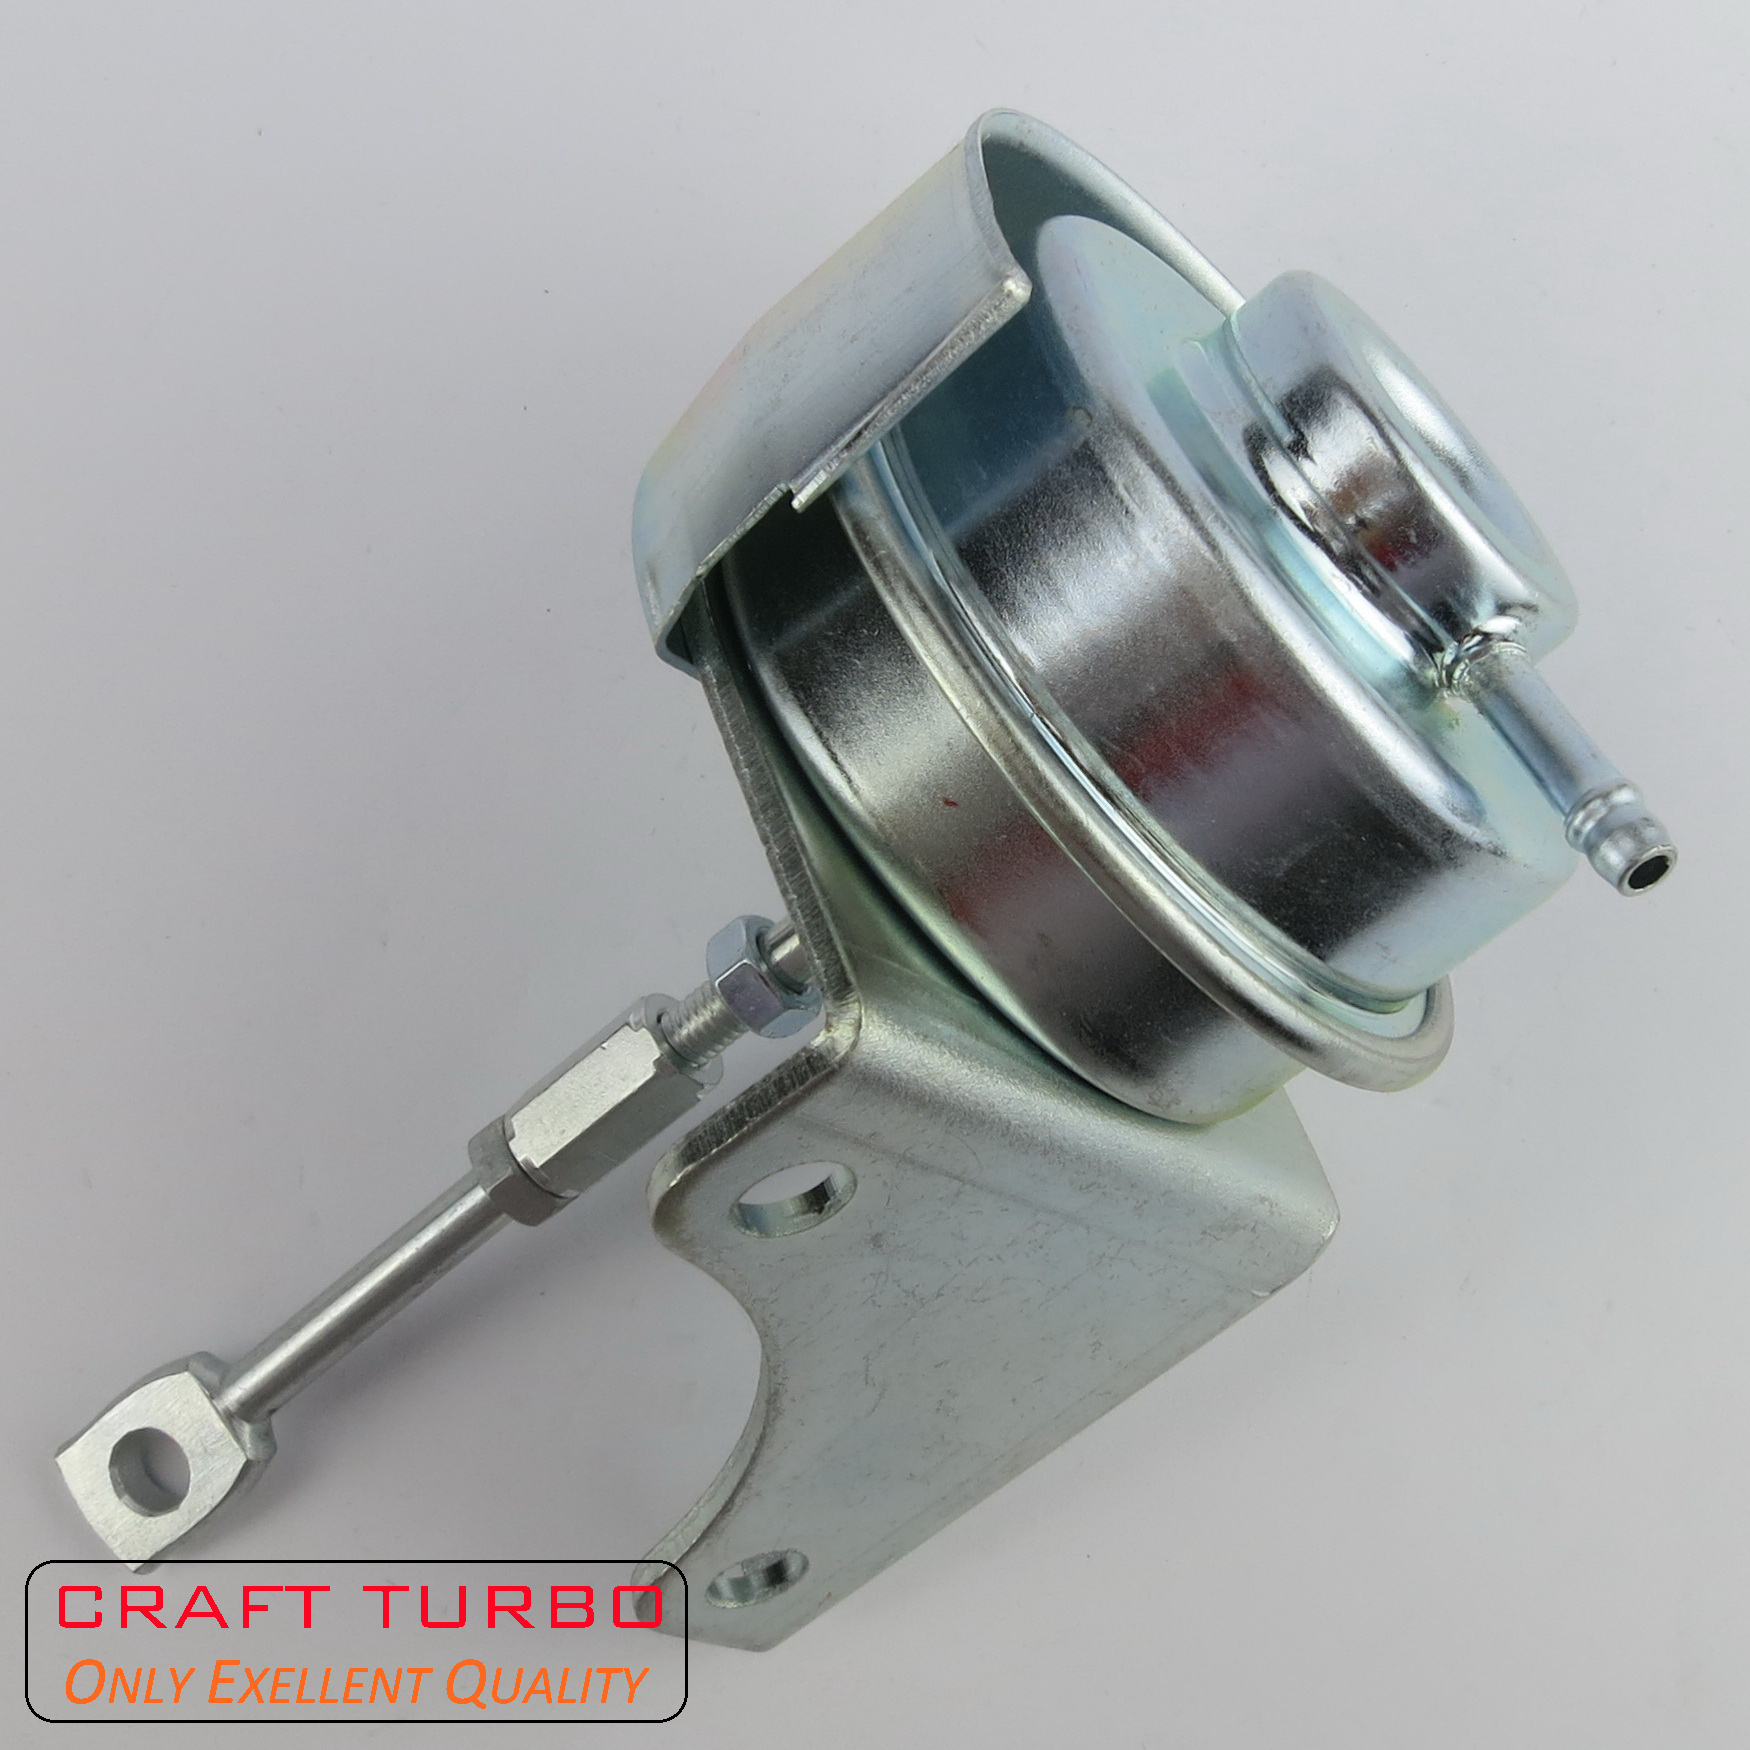 TF035HL Actuator for Turbochargers 